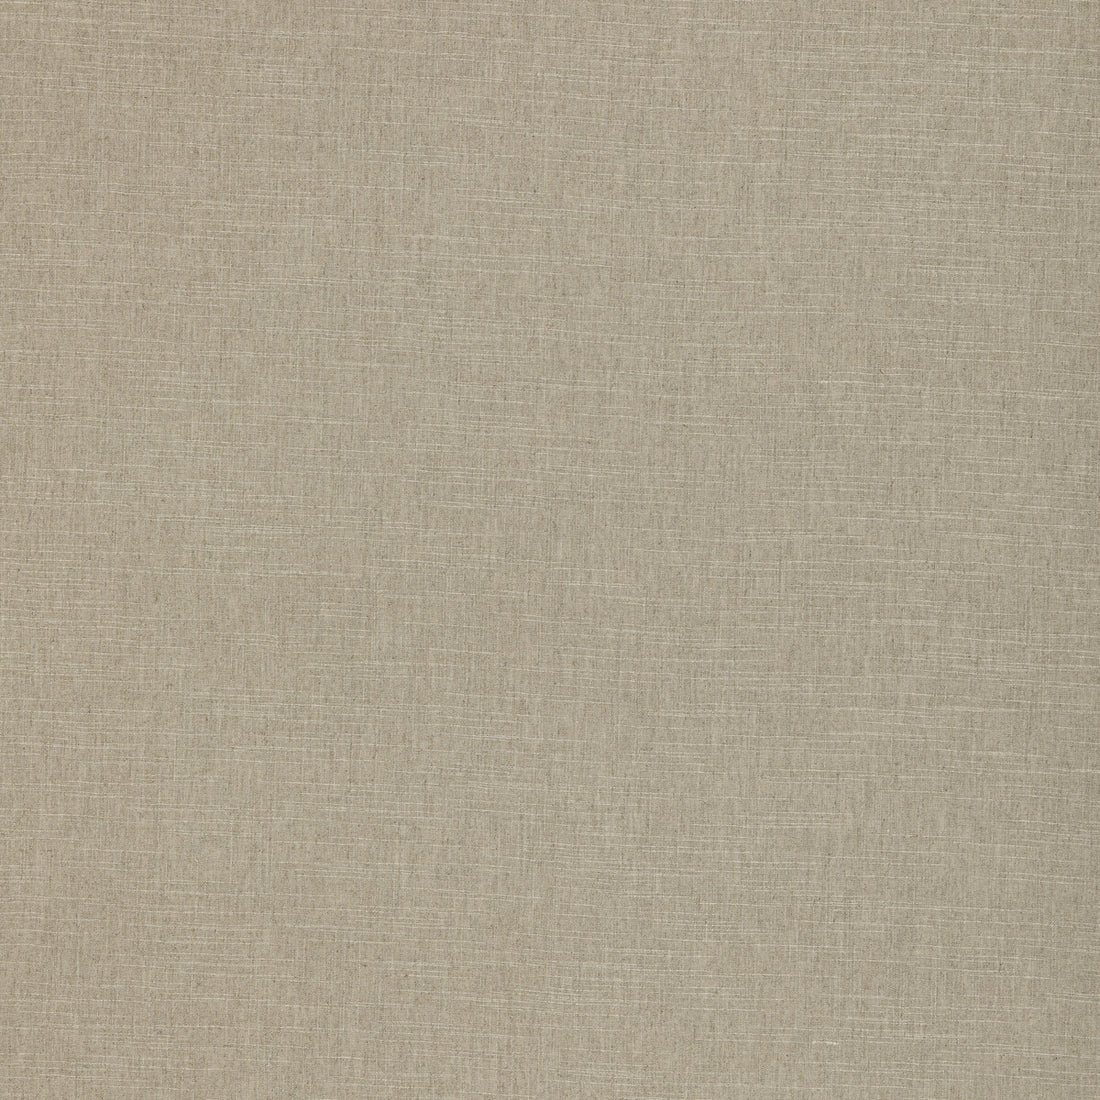 Chert fabric in linen color - pattern ED85390.110.0 - by Threads in the Quintessential Naturals collection